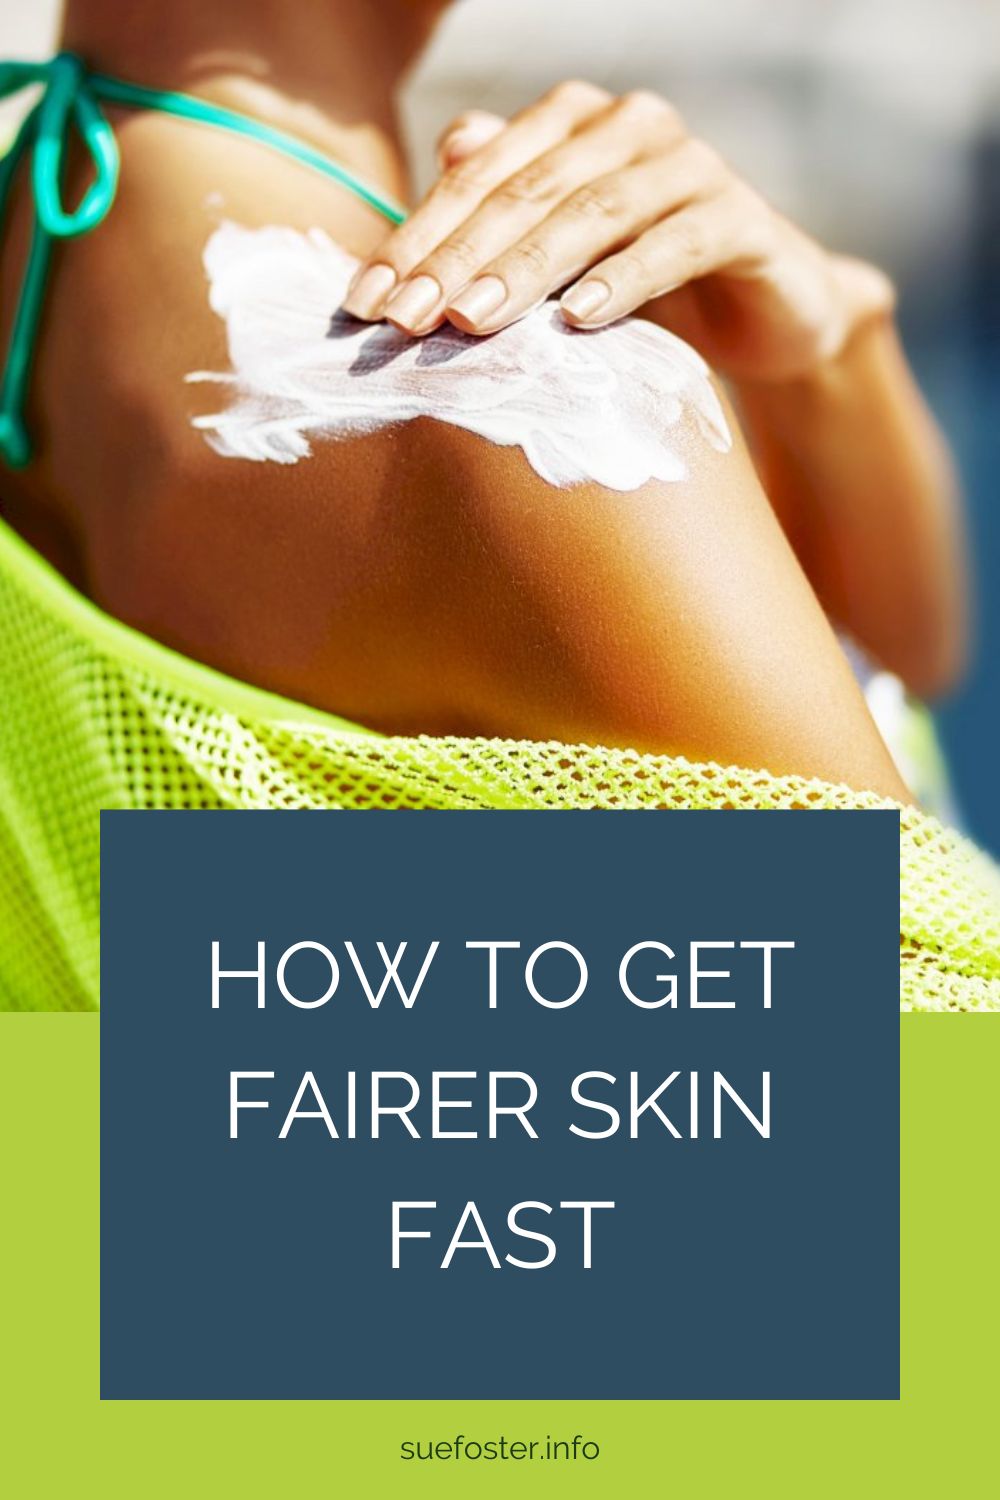 Looking for a fast and easy way to achieve a more radiant skin tone? This article will provide tips on how to get fairer skin quickly and easily.